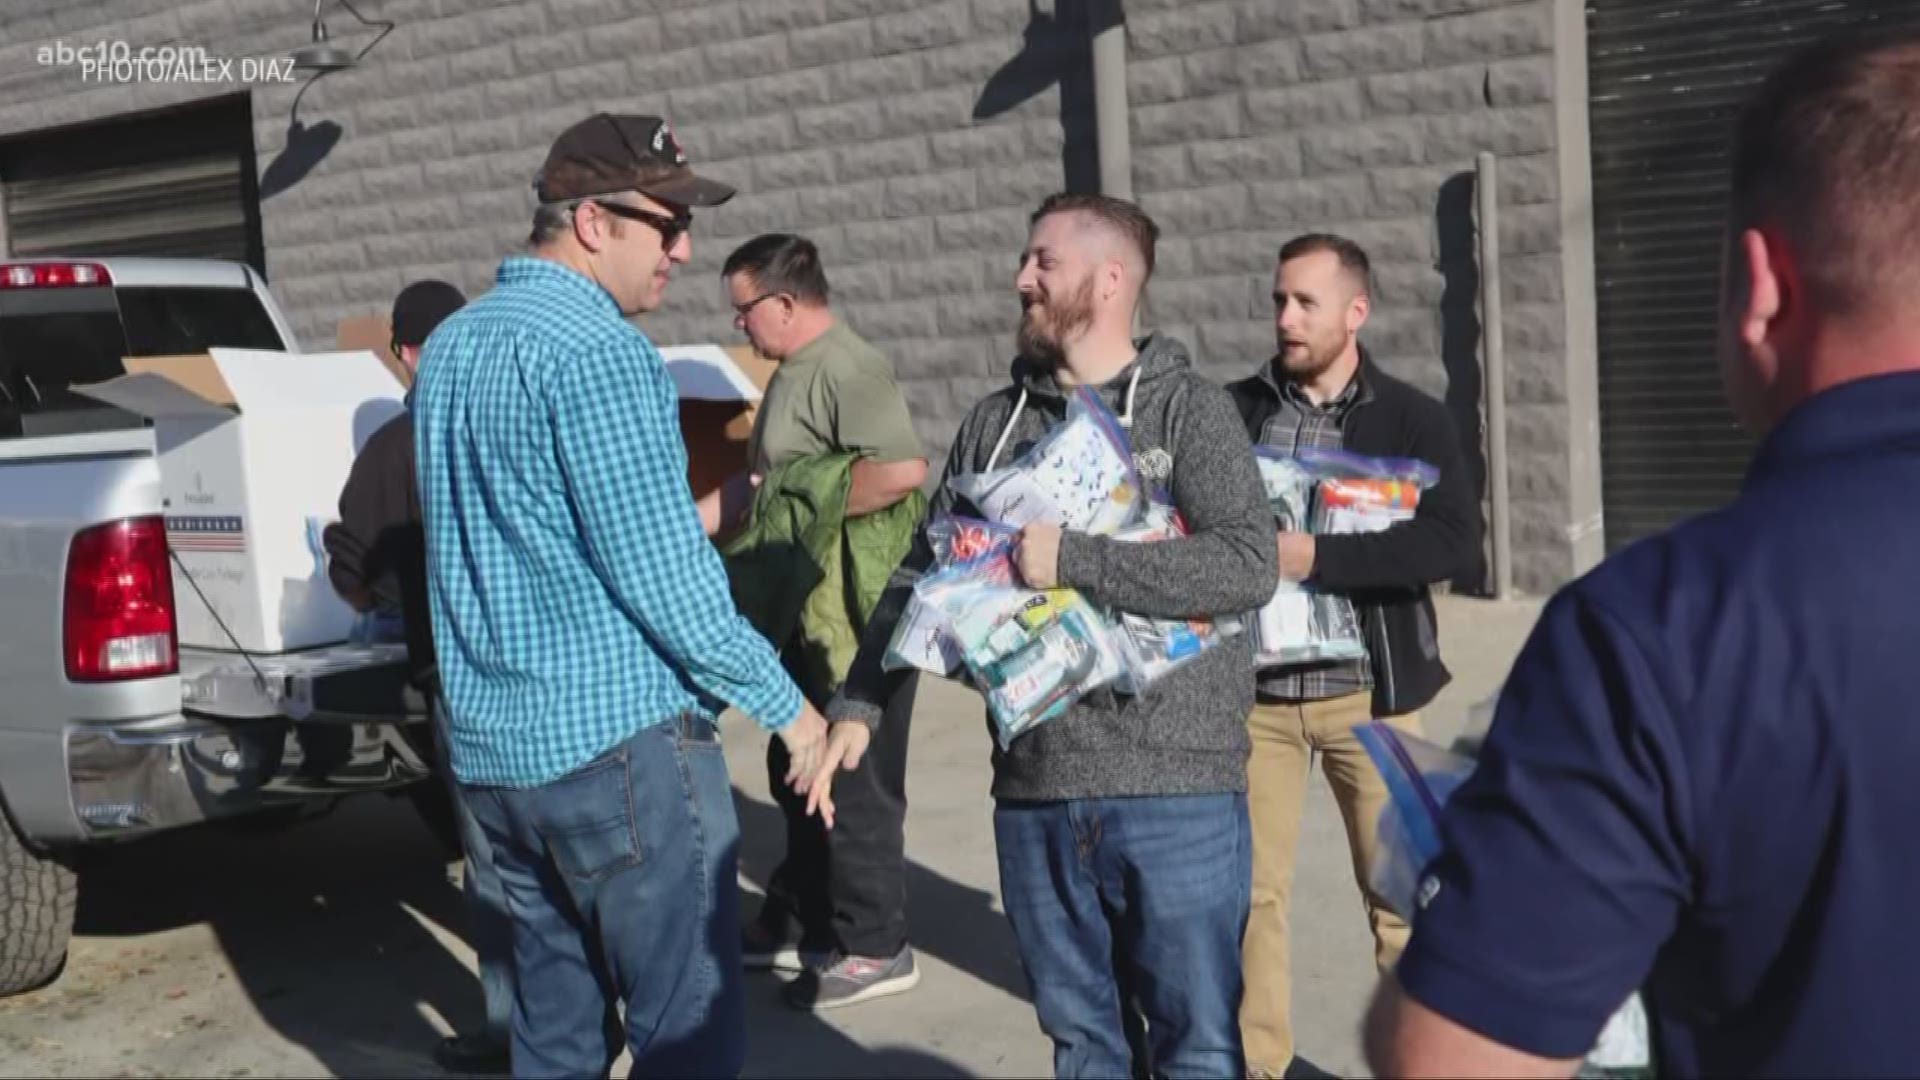 Members of the non-profit veteran support group Veteran Effect passed out 100 service member survival kits on Sunday to the homeless in Sacramento.